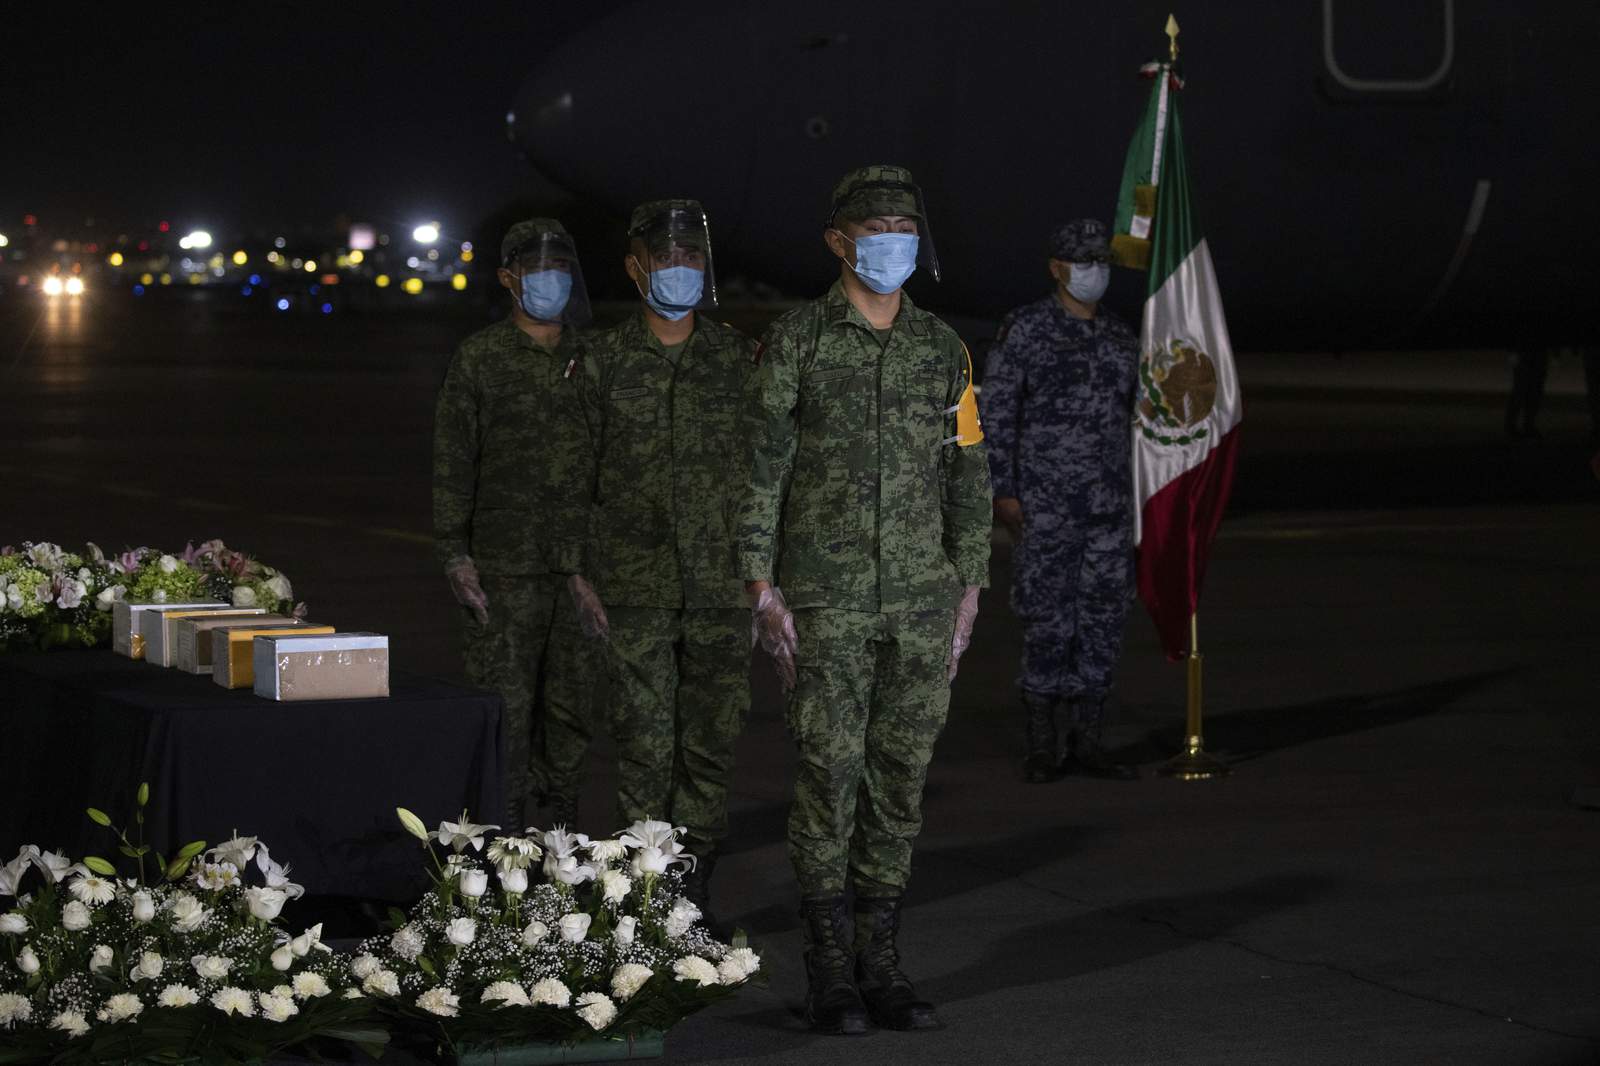 Mexico tops 35,000 deaths, making it country with 4th-highest death toll